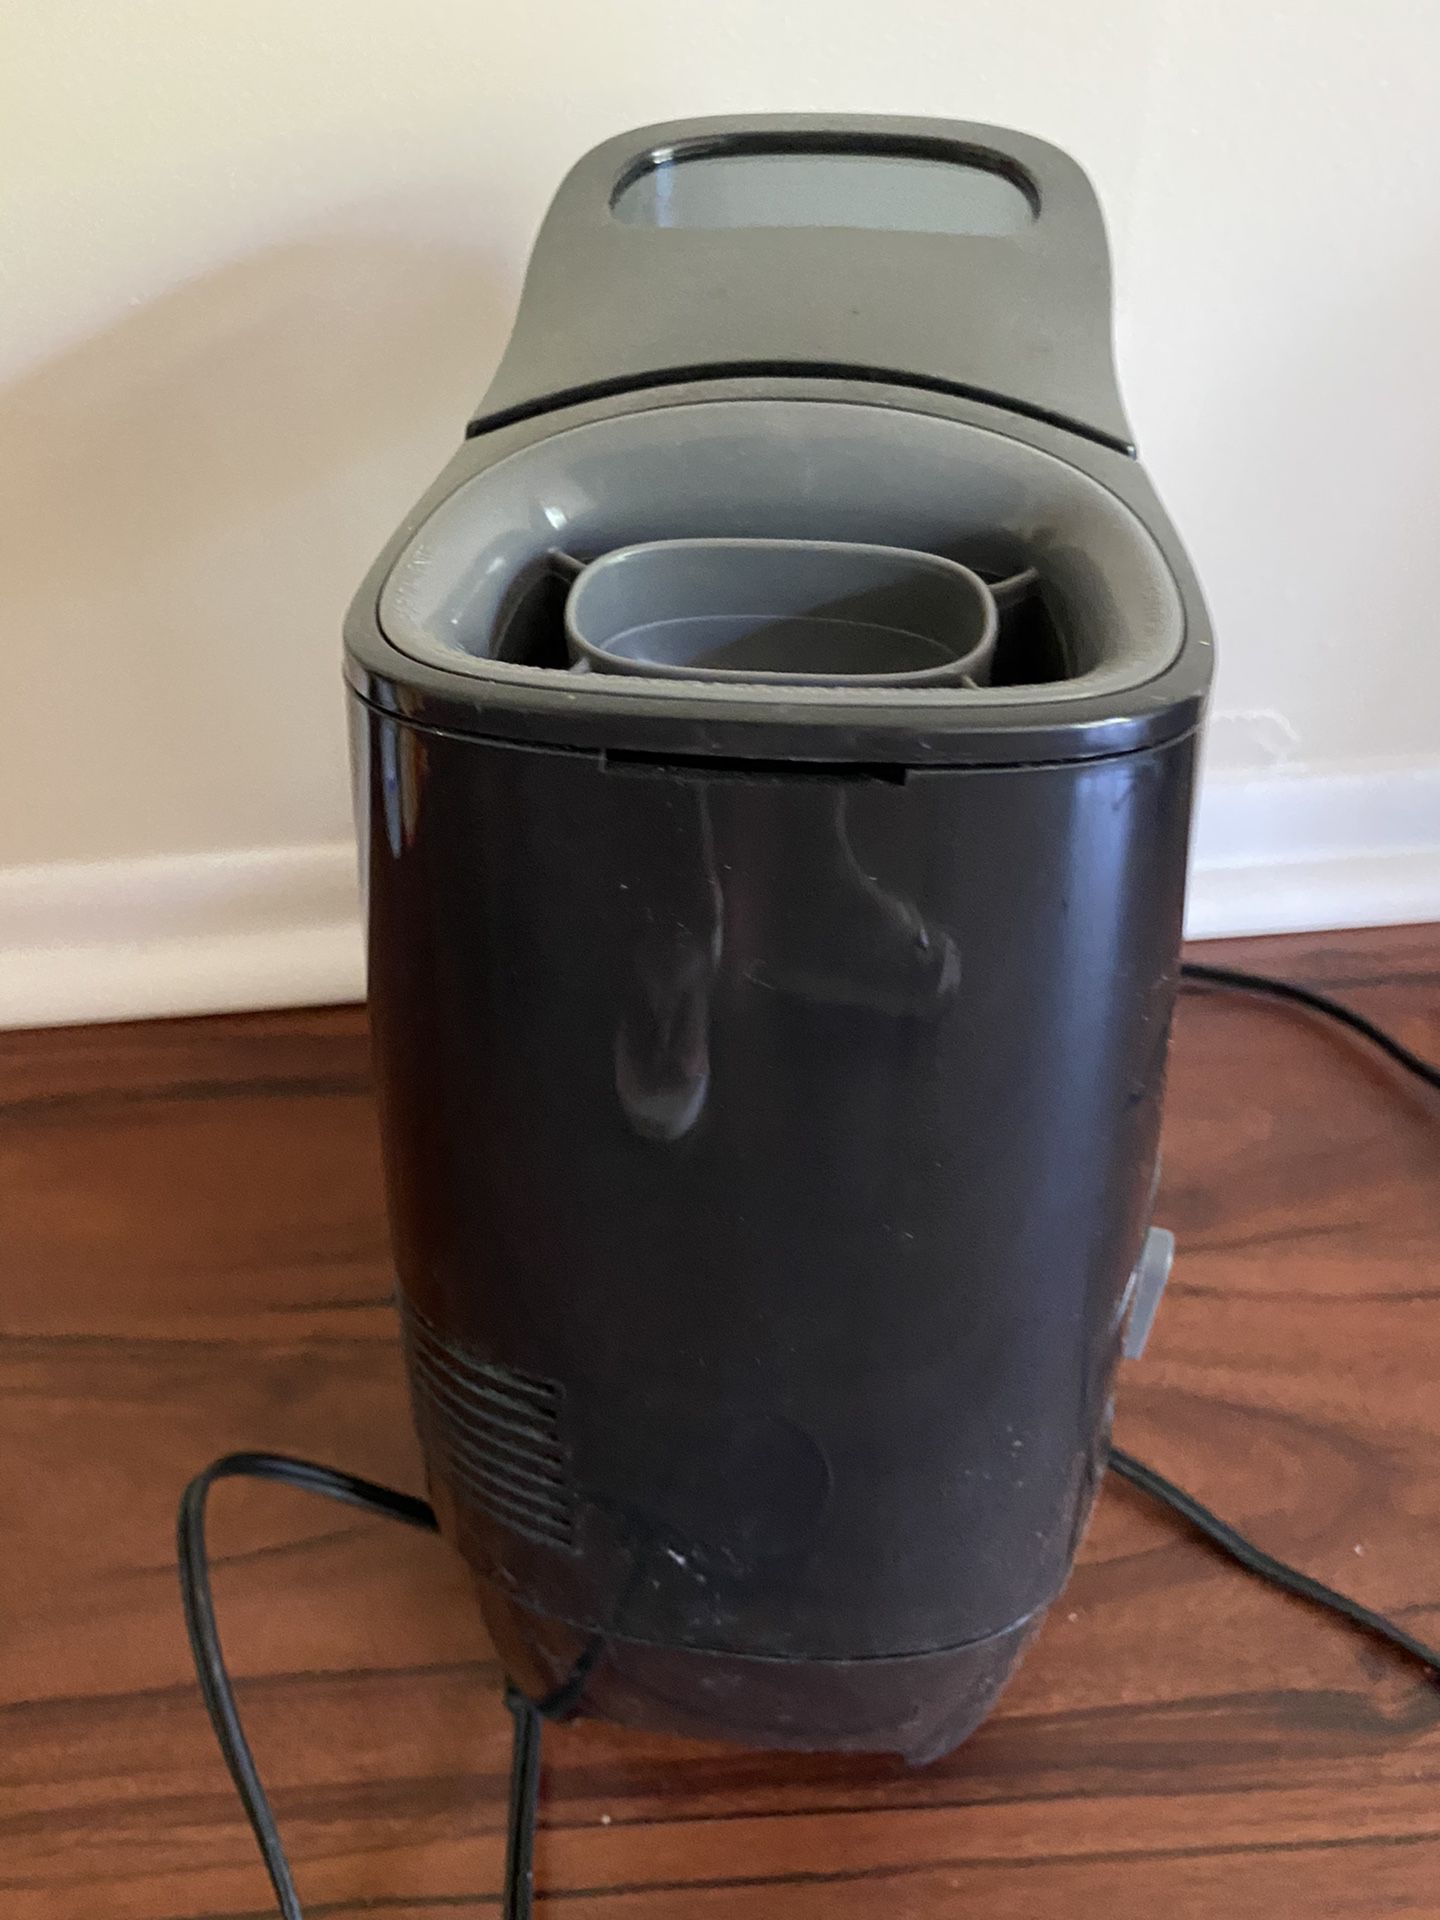 Air purifier and humidifier for $40